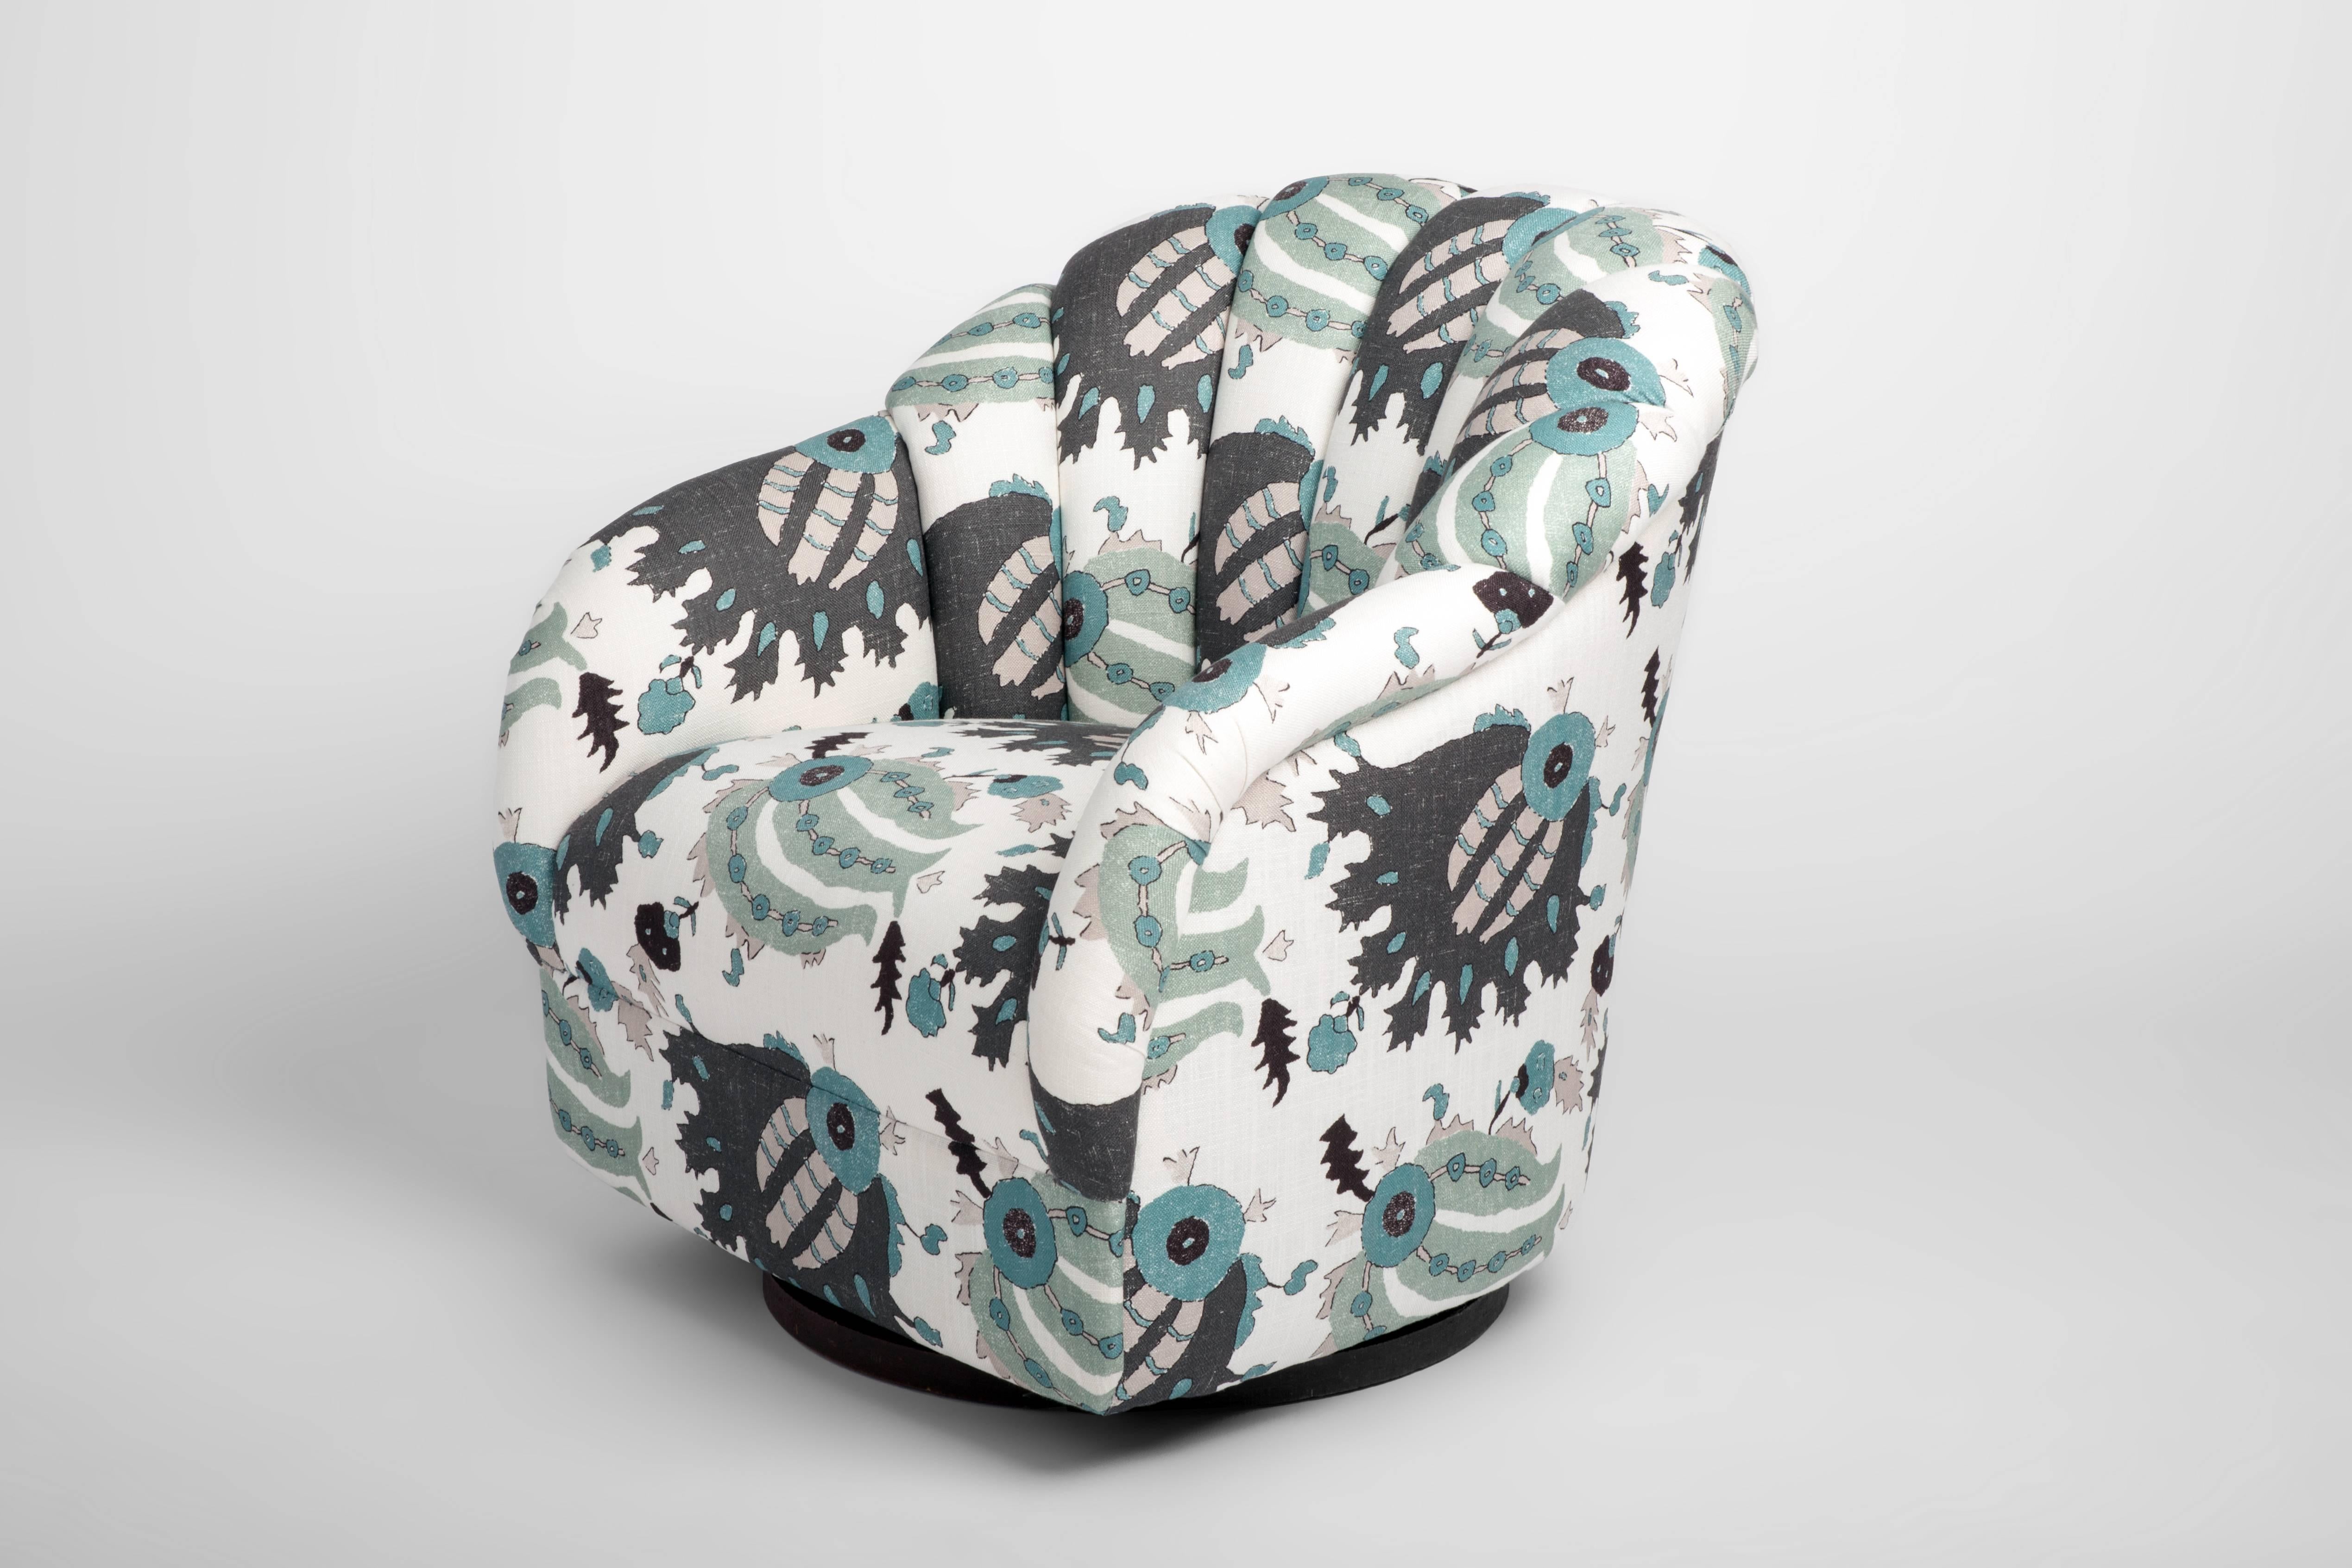 Recovered in a Lorenzo Castillo fabric, this swivel barrel back chair is an iconic Ward Bennet design. 

Ward Bennet is an American designer, artist and sculptor. Uniquely American, Bennet created a design that was called “sensual minimalism” that